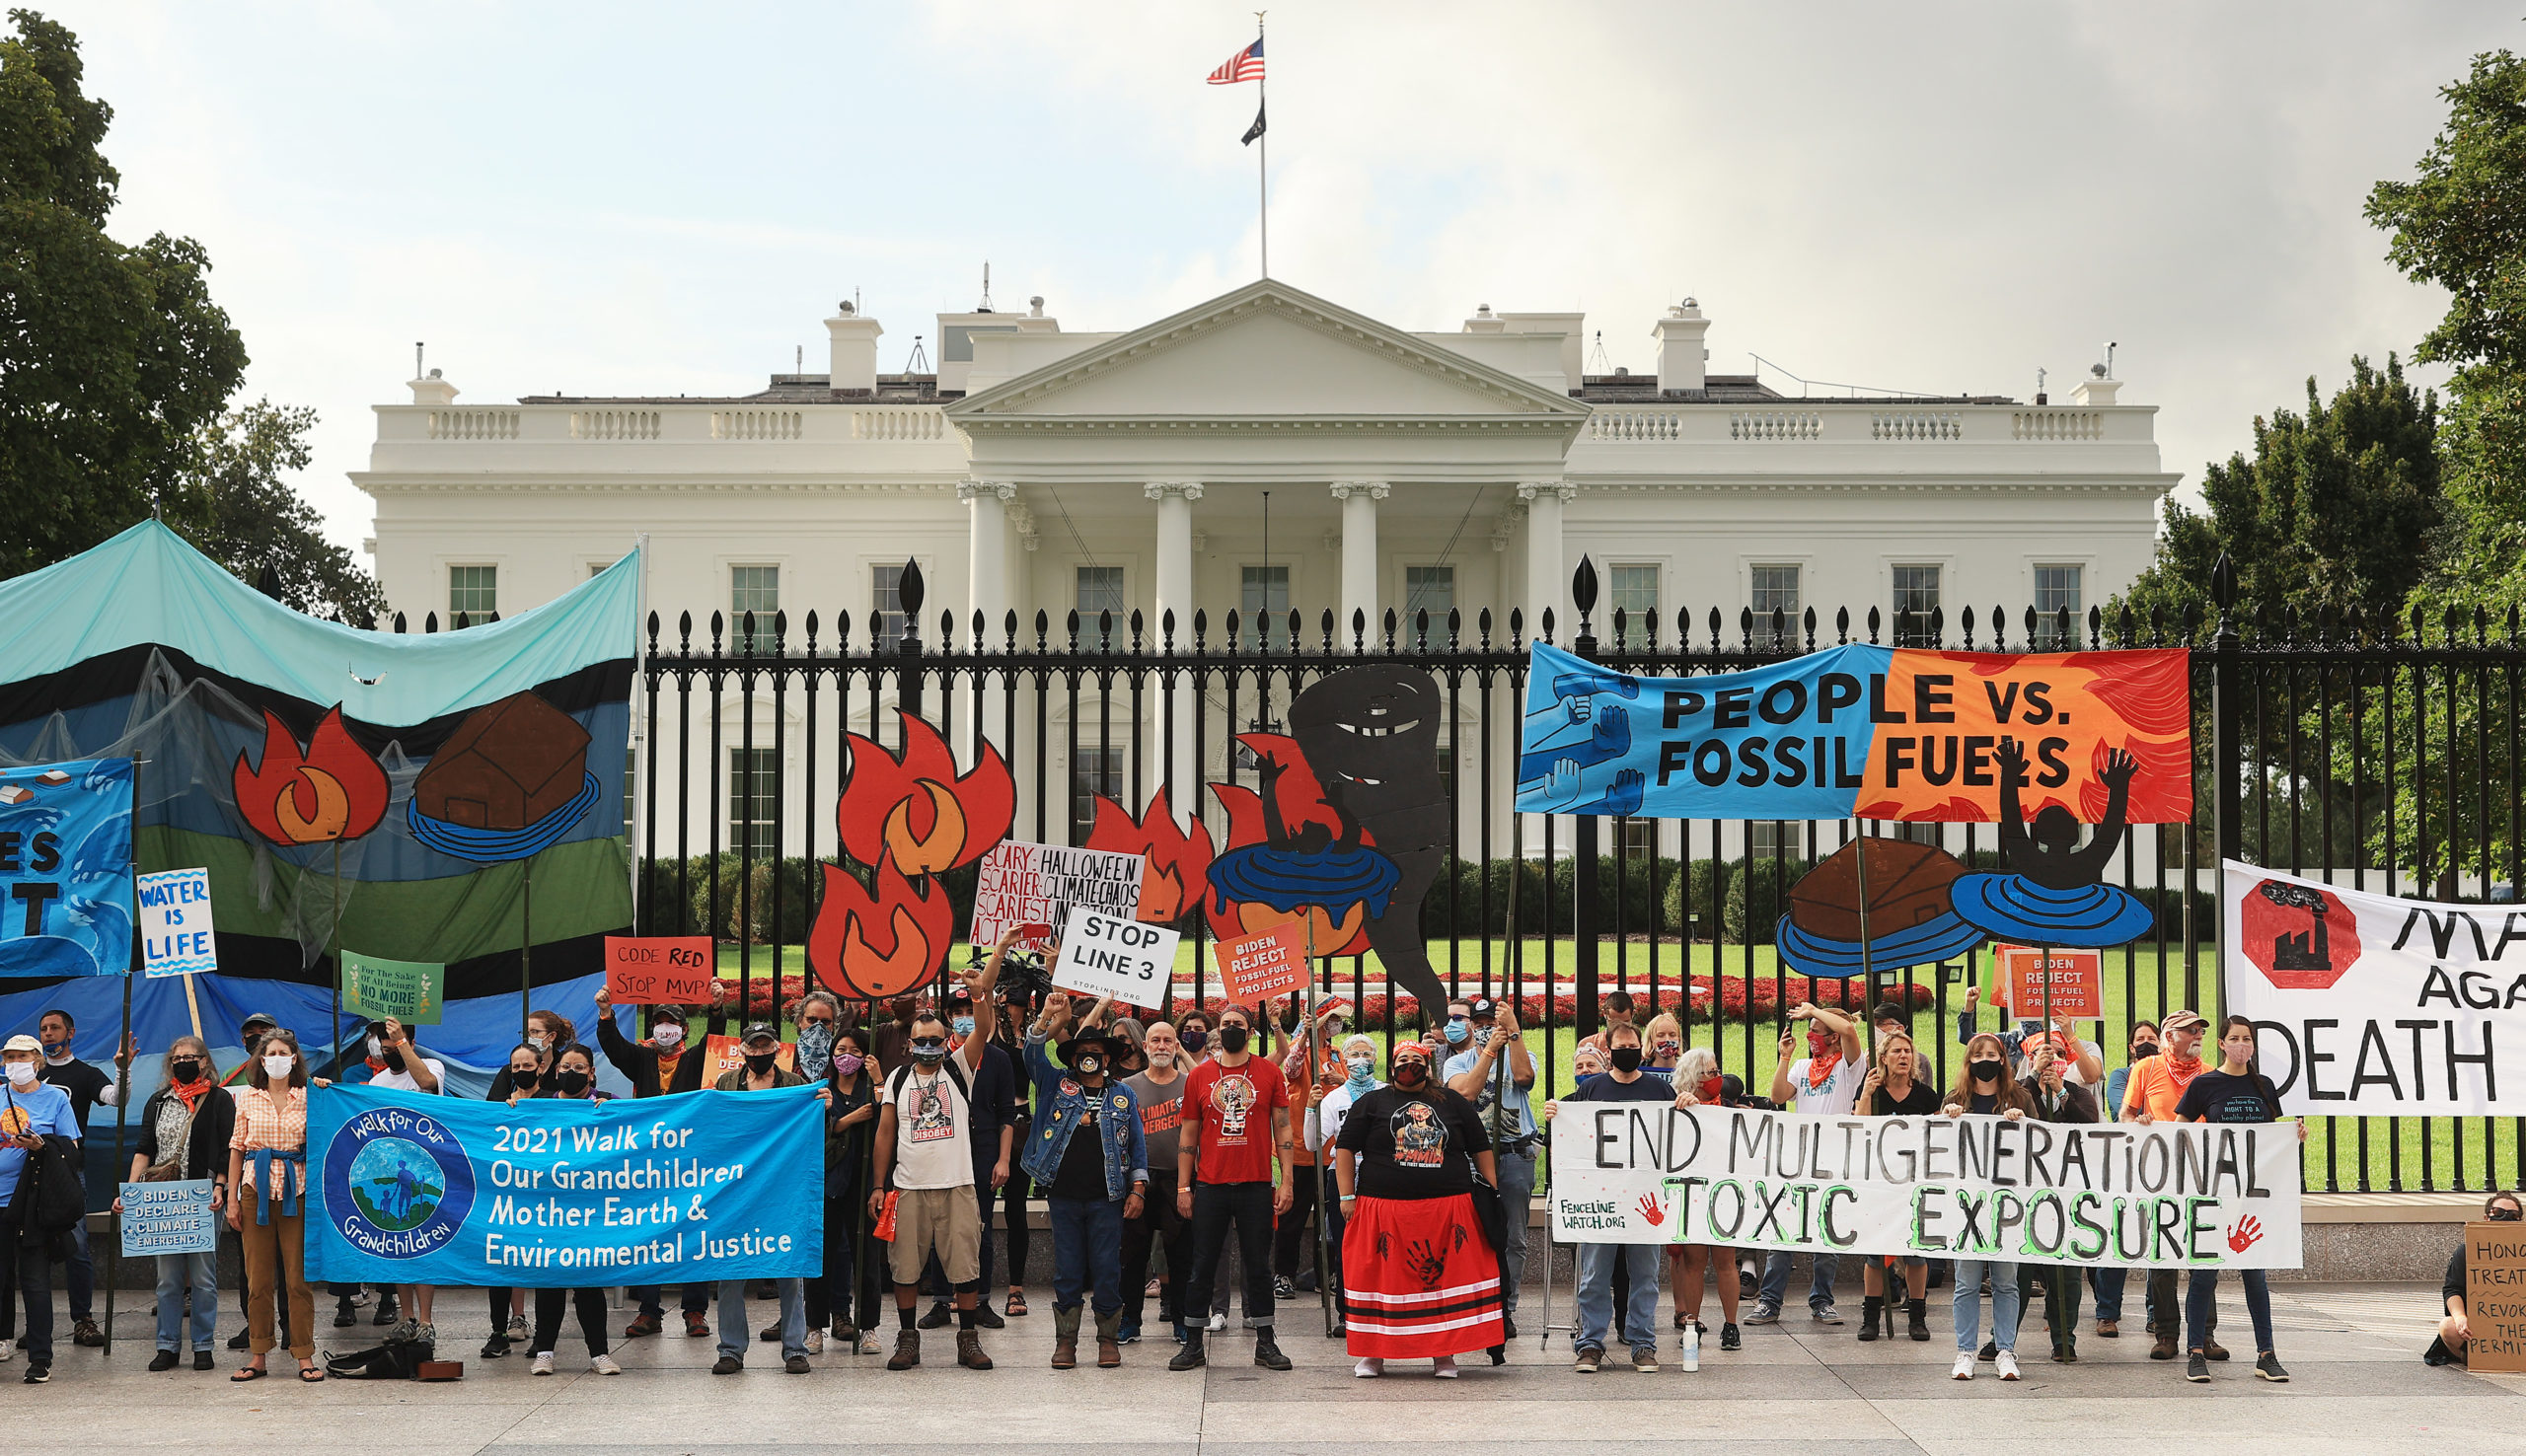 Demonstrators prepare to be arrested during a rally outside the White House on Oct. 13. (Chip Somodevilla/Getty Images)